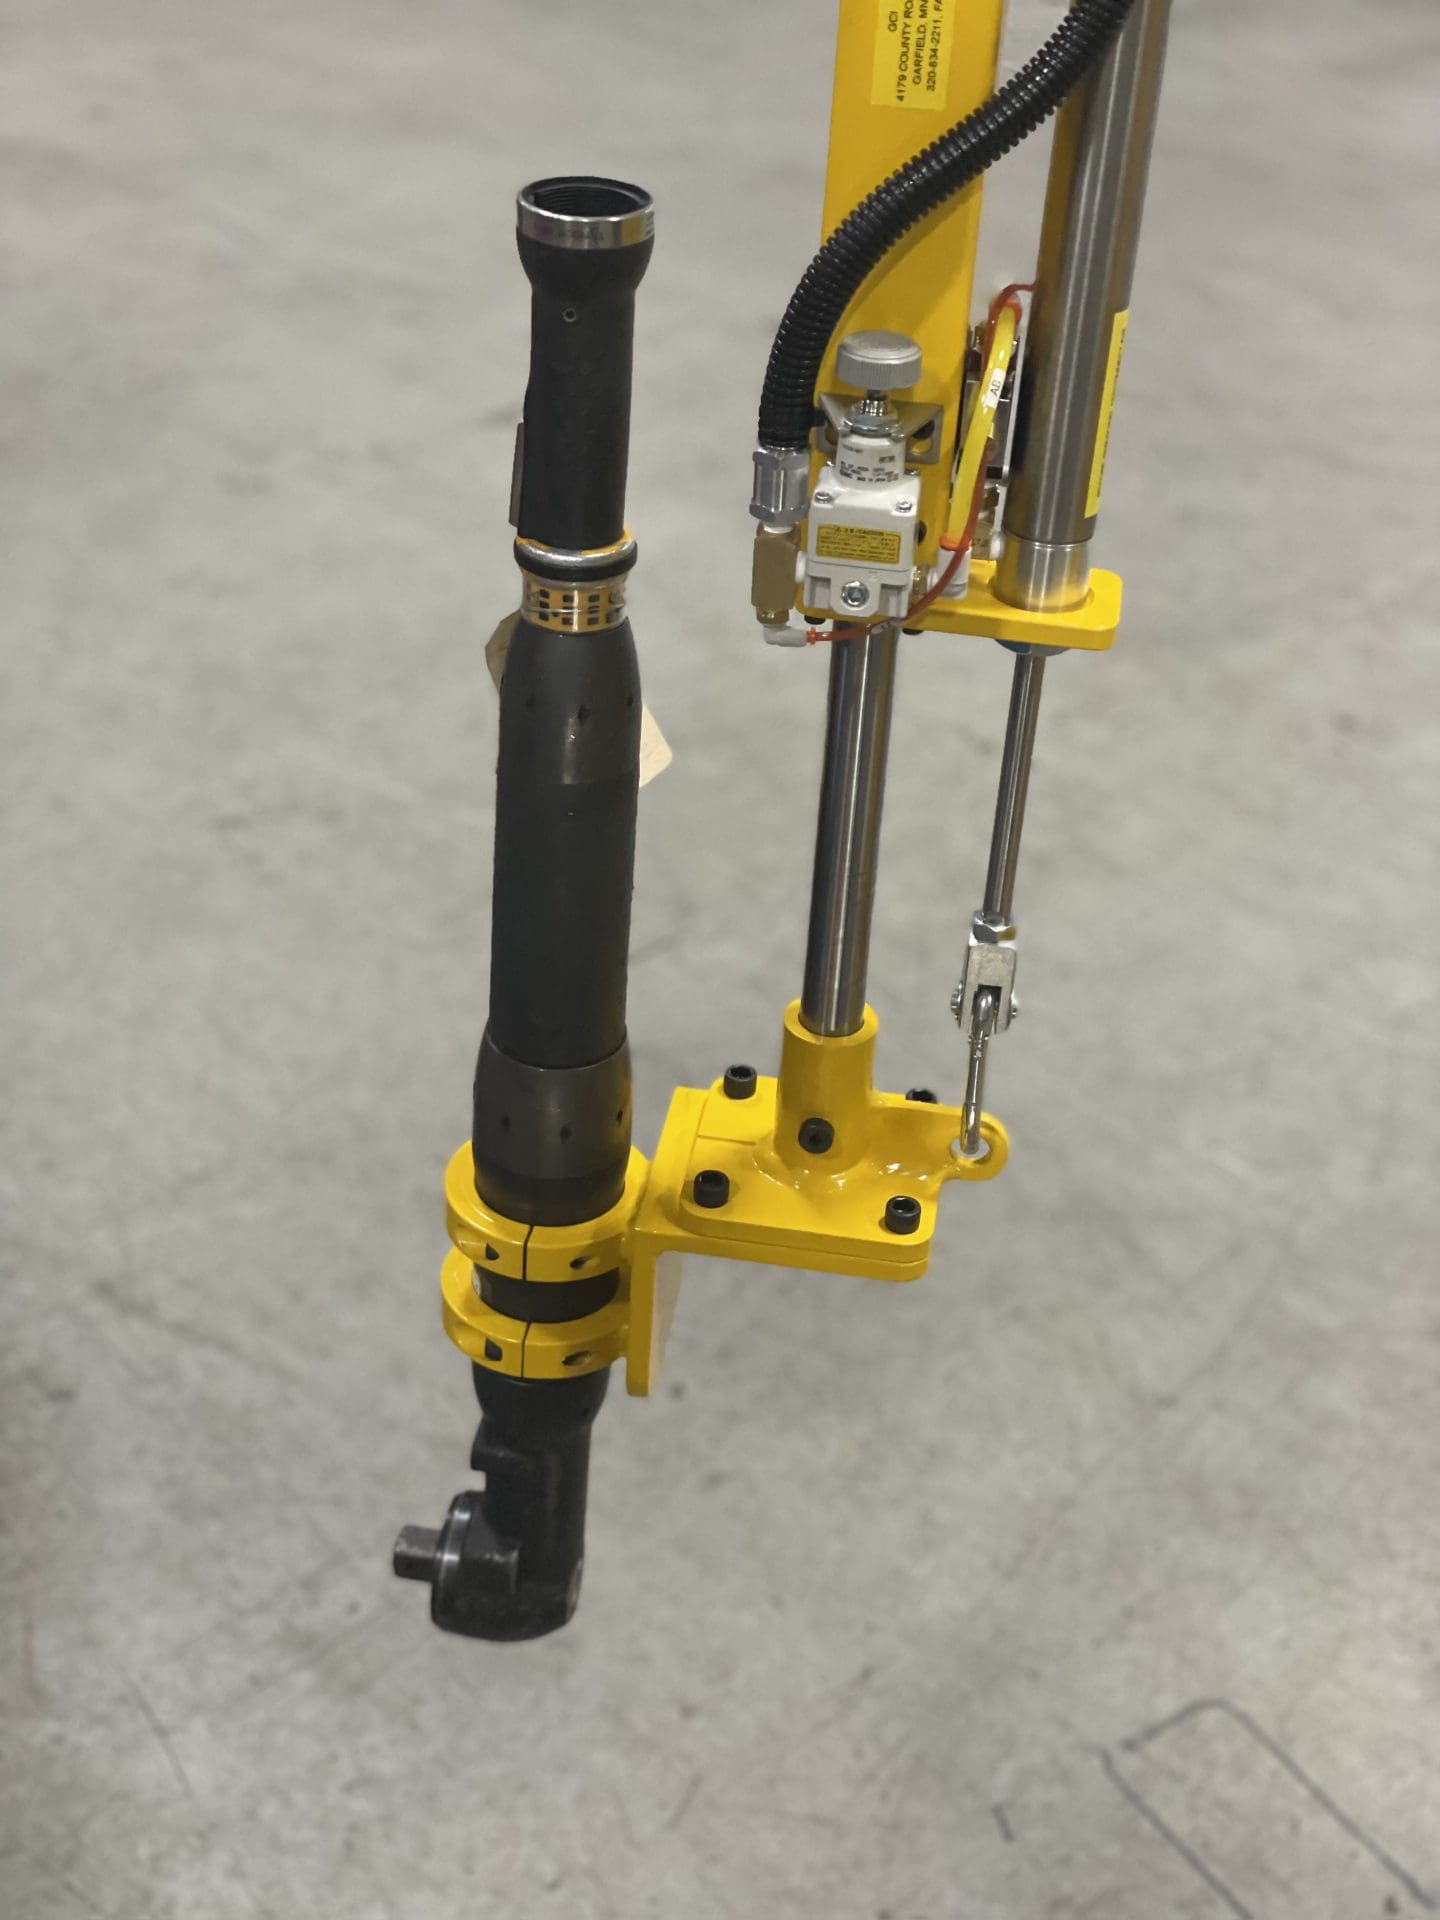 Torque tube and tool load balancer extended